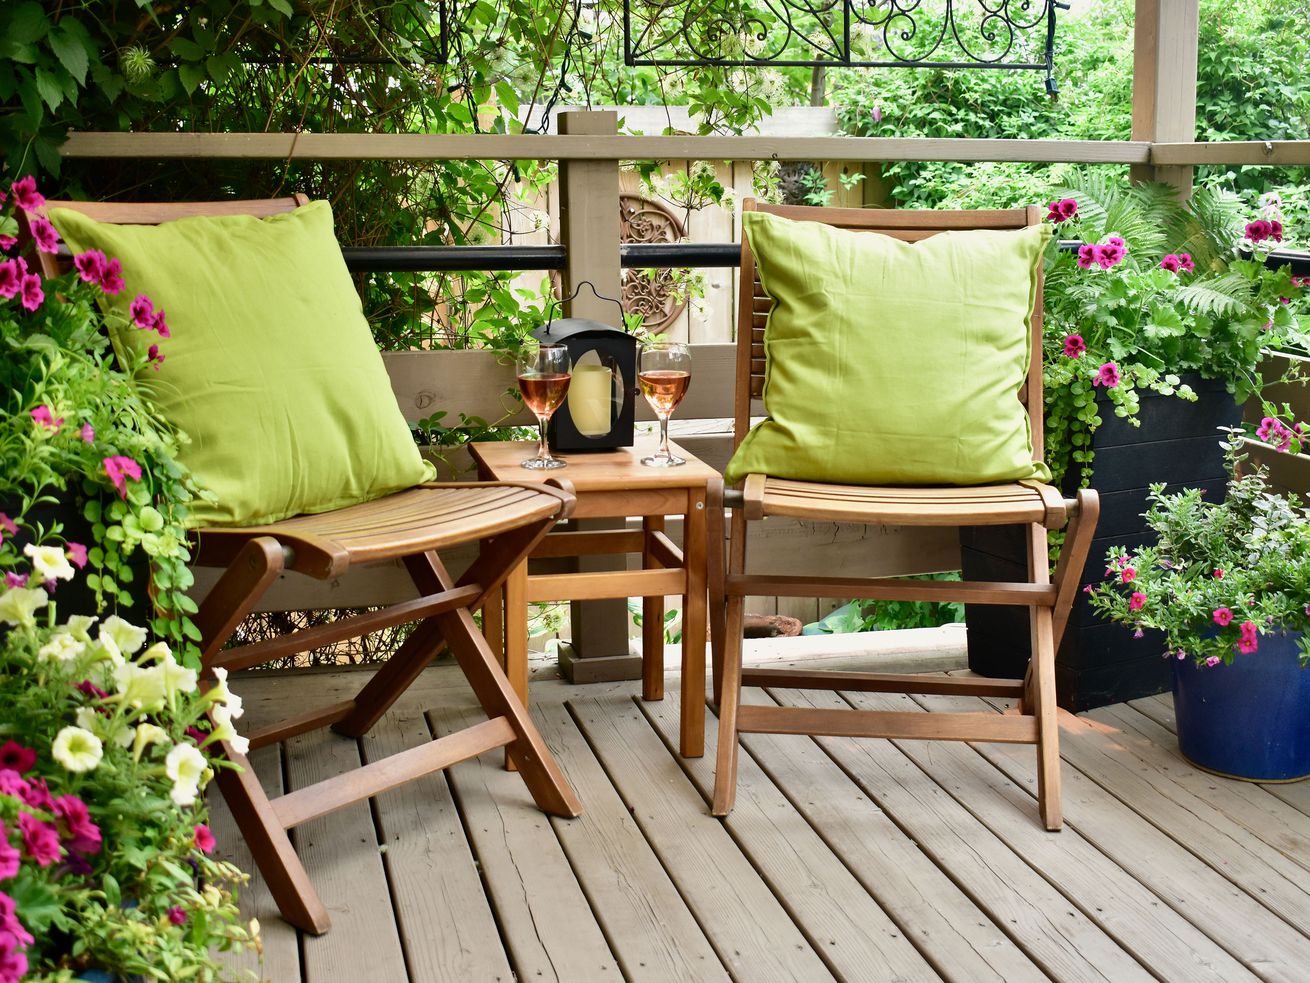 Deck with two chairs and green pillows.